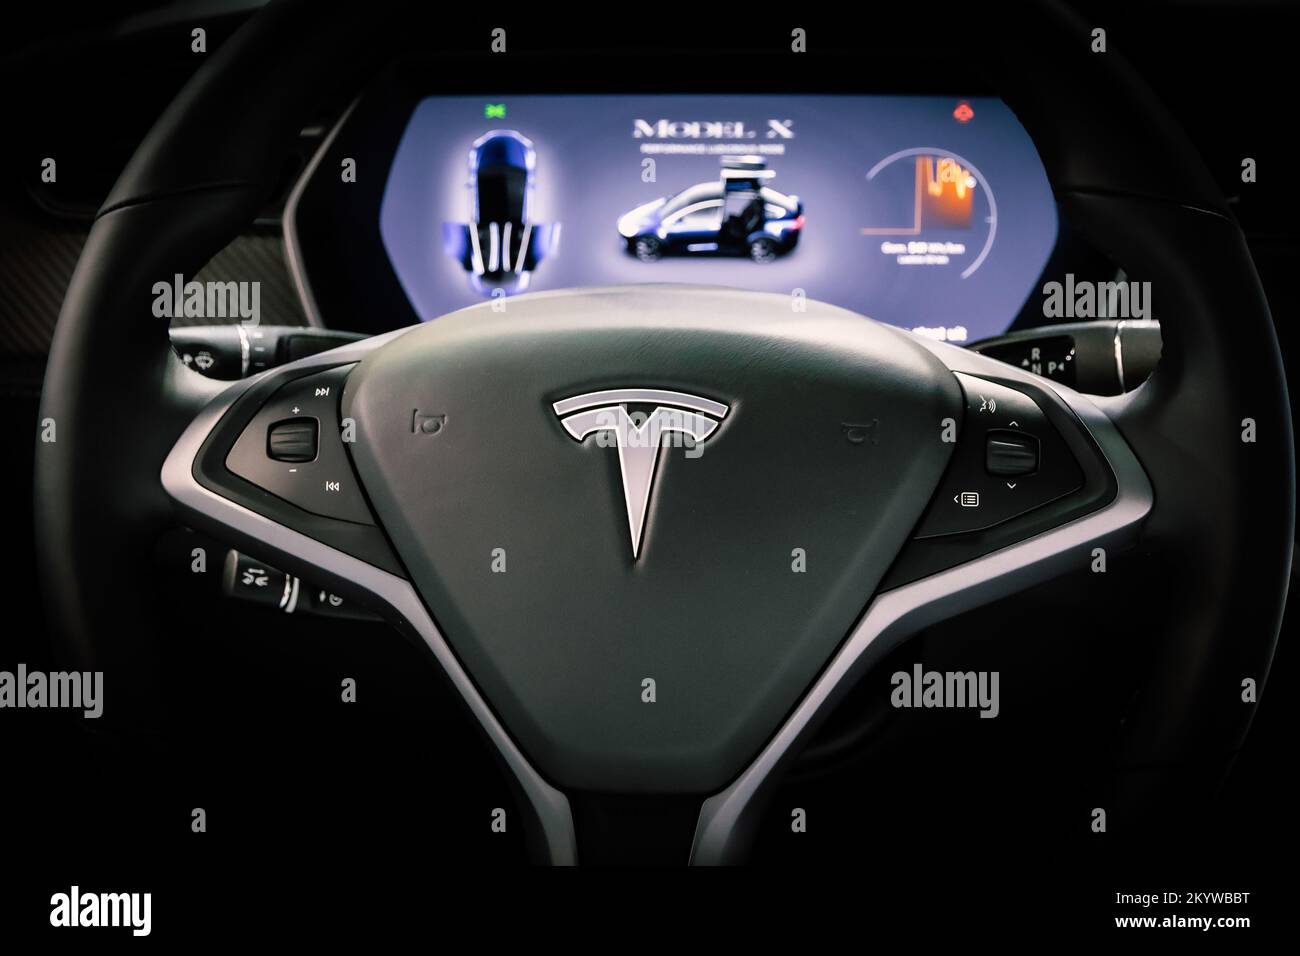 Tesla Model X car model interior dashboard view shown at the Autosalon 2020 Motor Show. Brussels, Belgium - January 9, 2020. Stock Photo